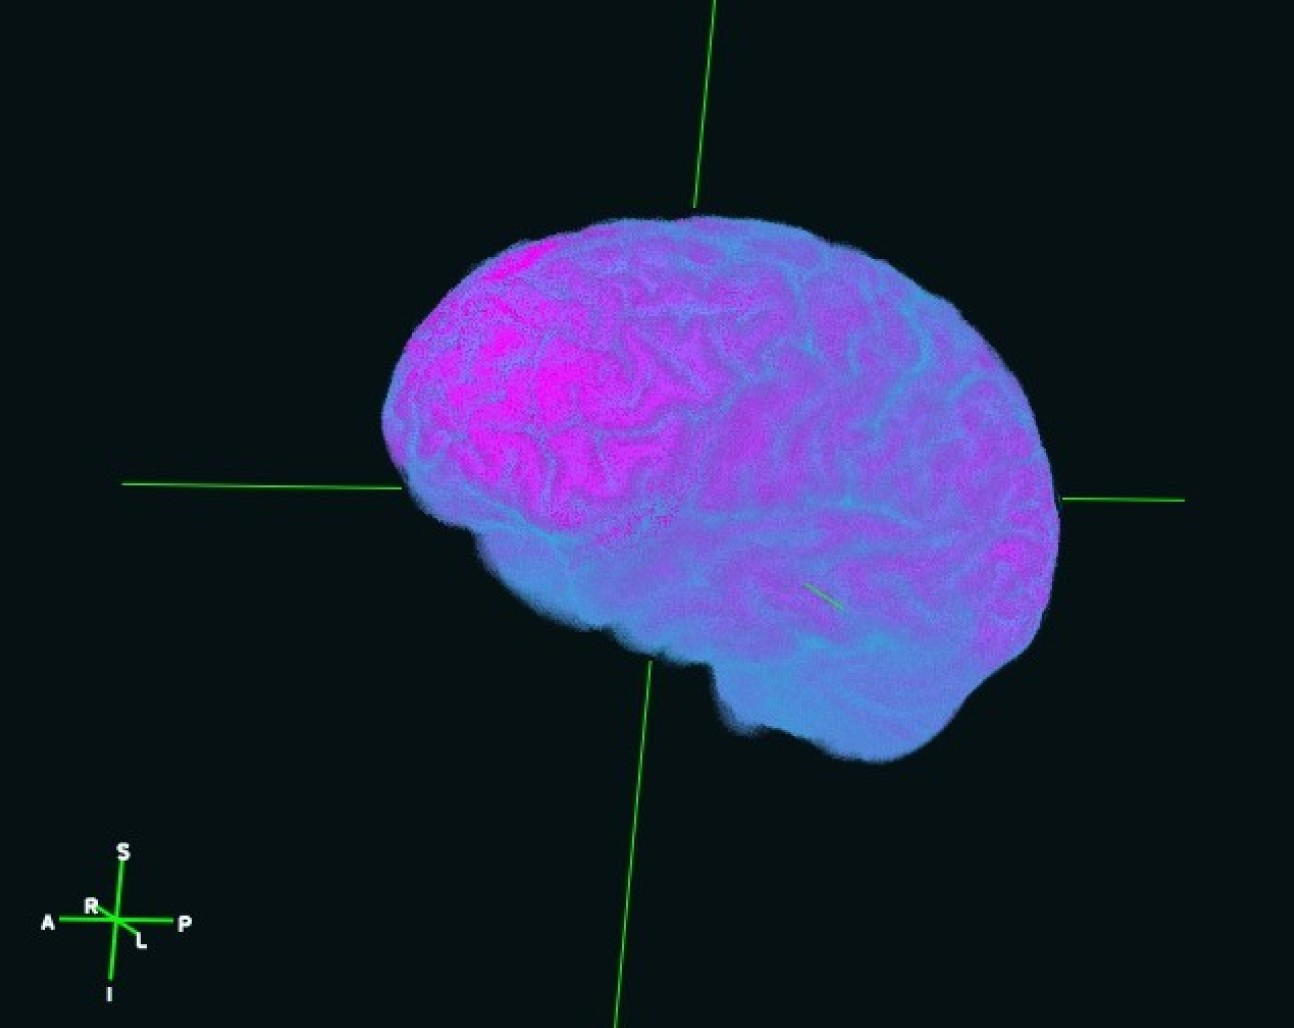 3D reconstruction of the brain of the artist